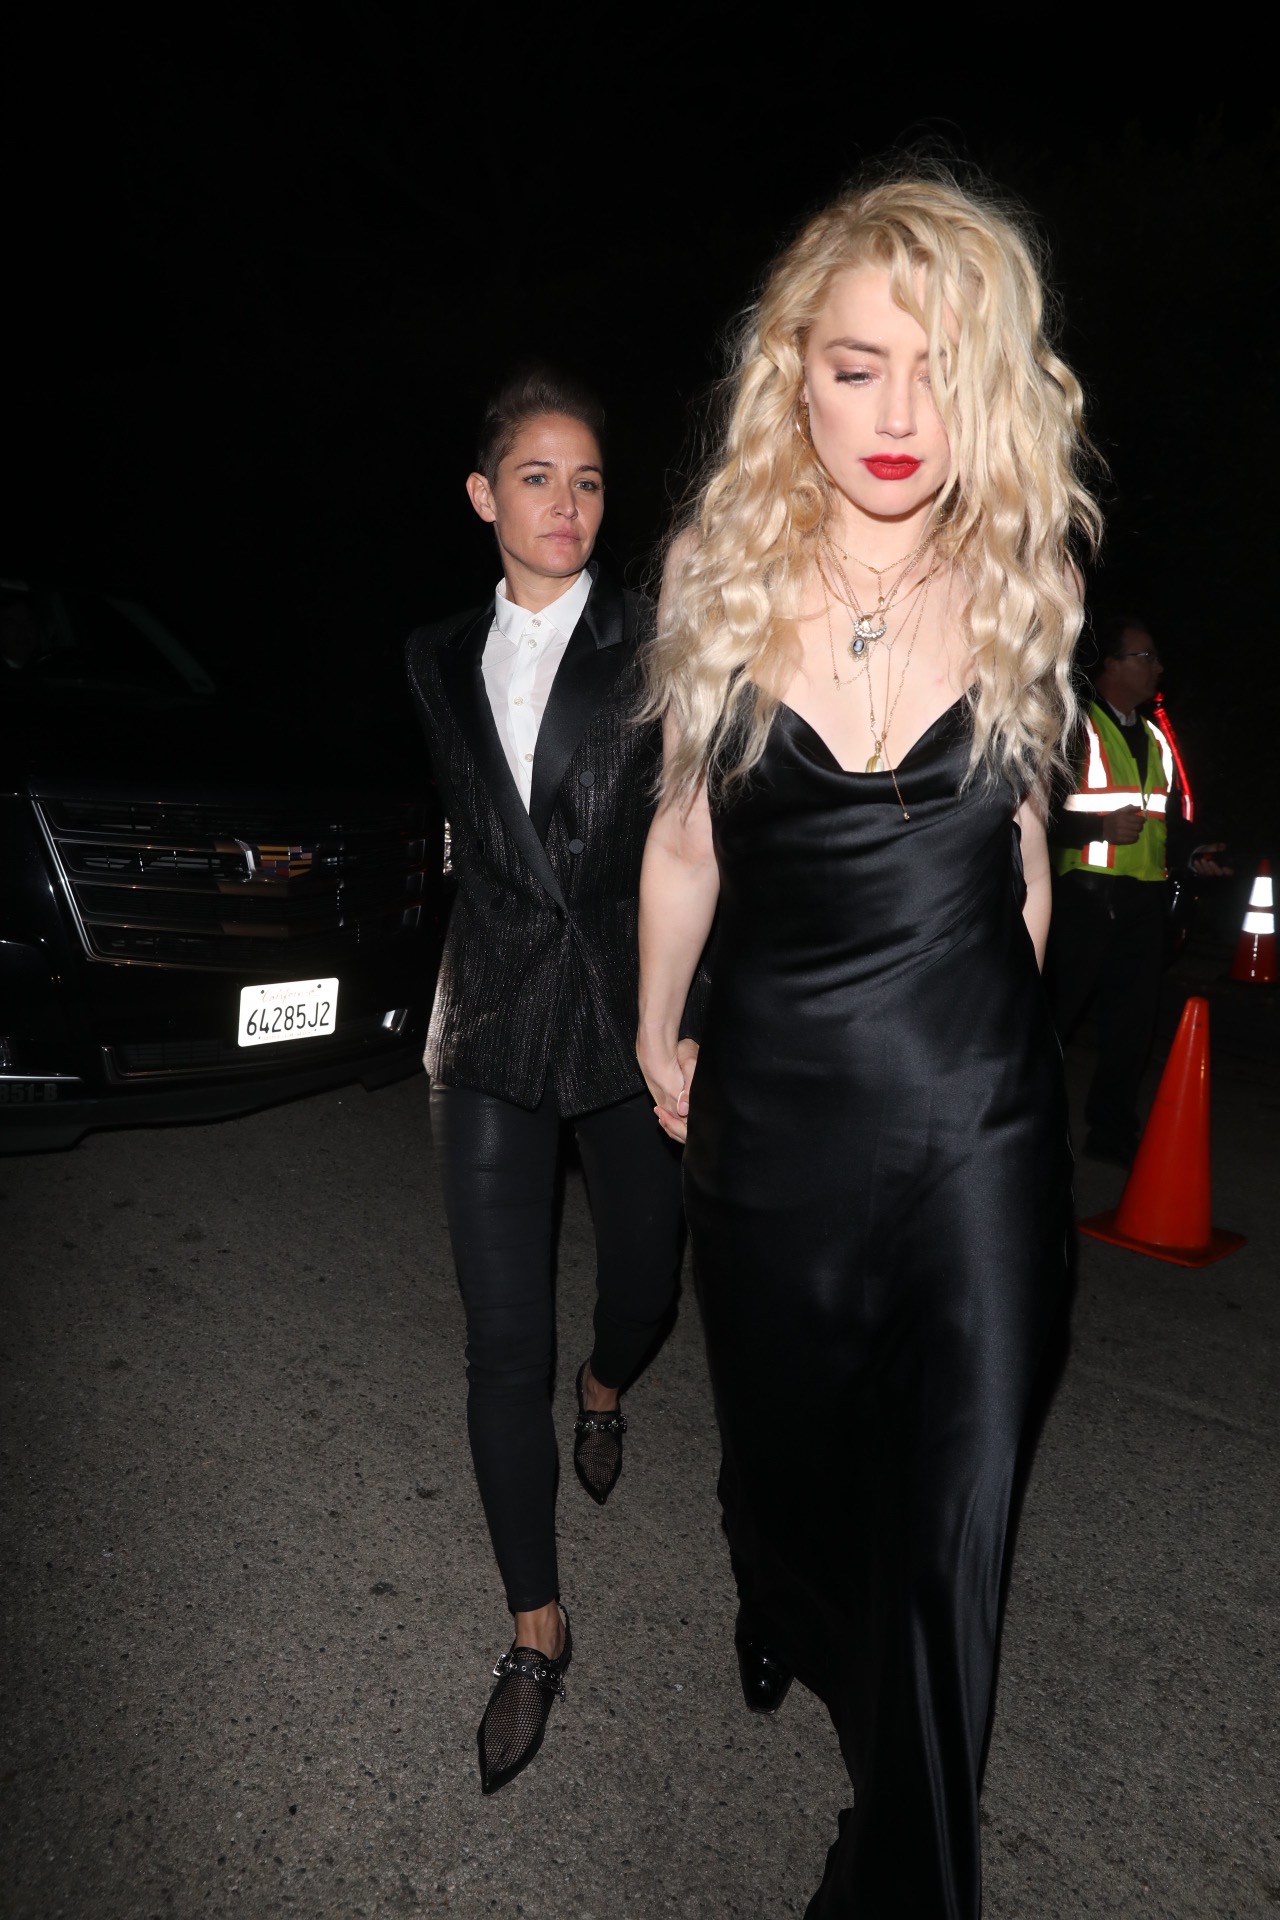 Amber Heard is seen arriving with her new girlfriend at the Oscars WME party . Her date was very protective as she stopped a moving SUV.
07 Feb 2020, Image: 497111157, License: Rights-managed, Restrictions: World Rights, Model Release: no, Credit line: 007 / MEGA / The Mega Agency / Profimedia